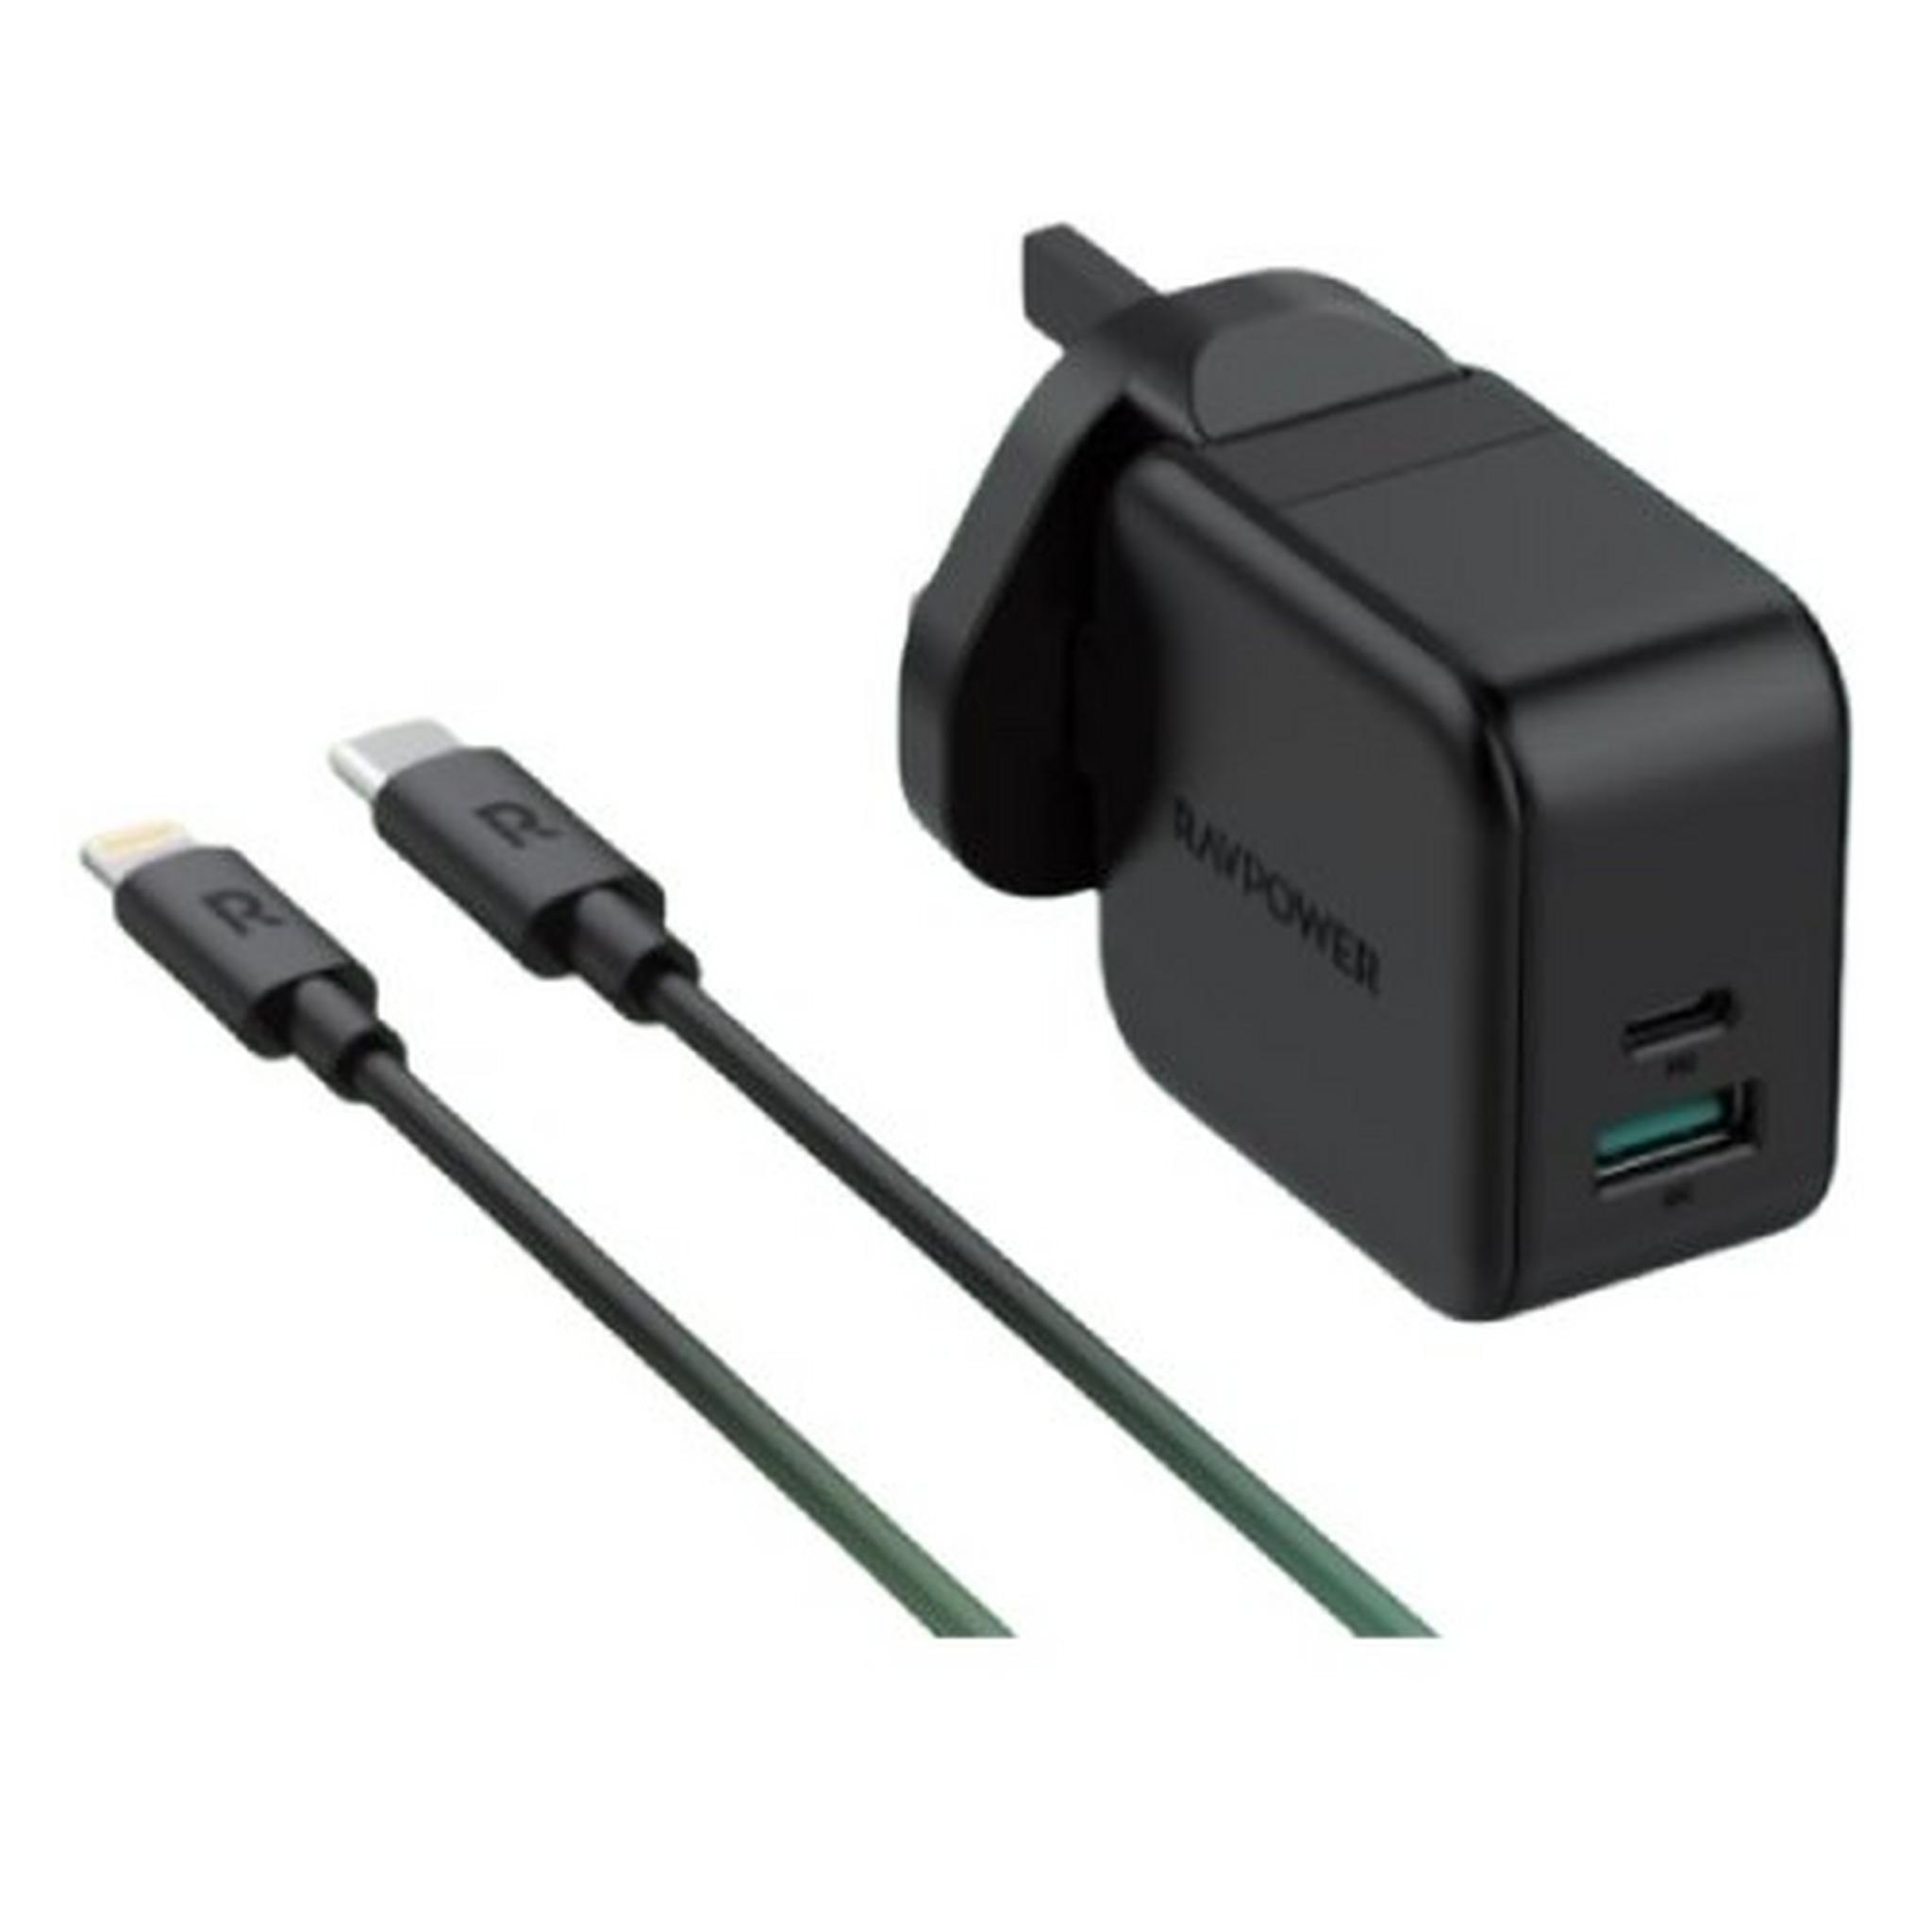 RAVPower PD 18w Charger + 1m USB Cable Combo (RP-PC109) - Black